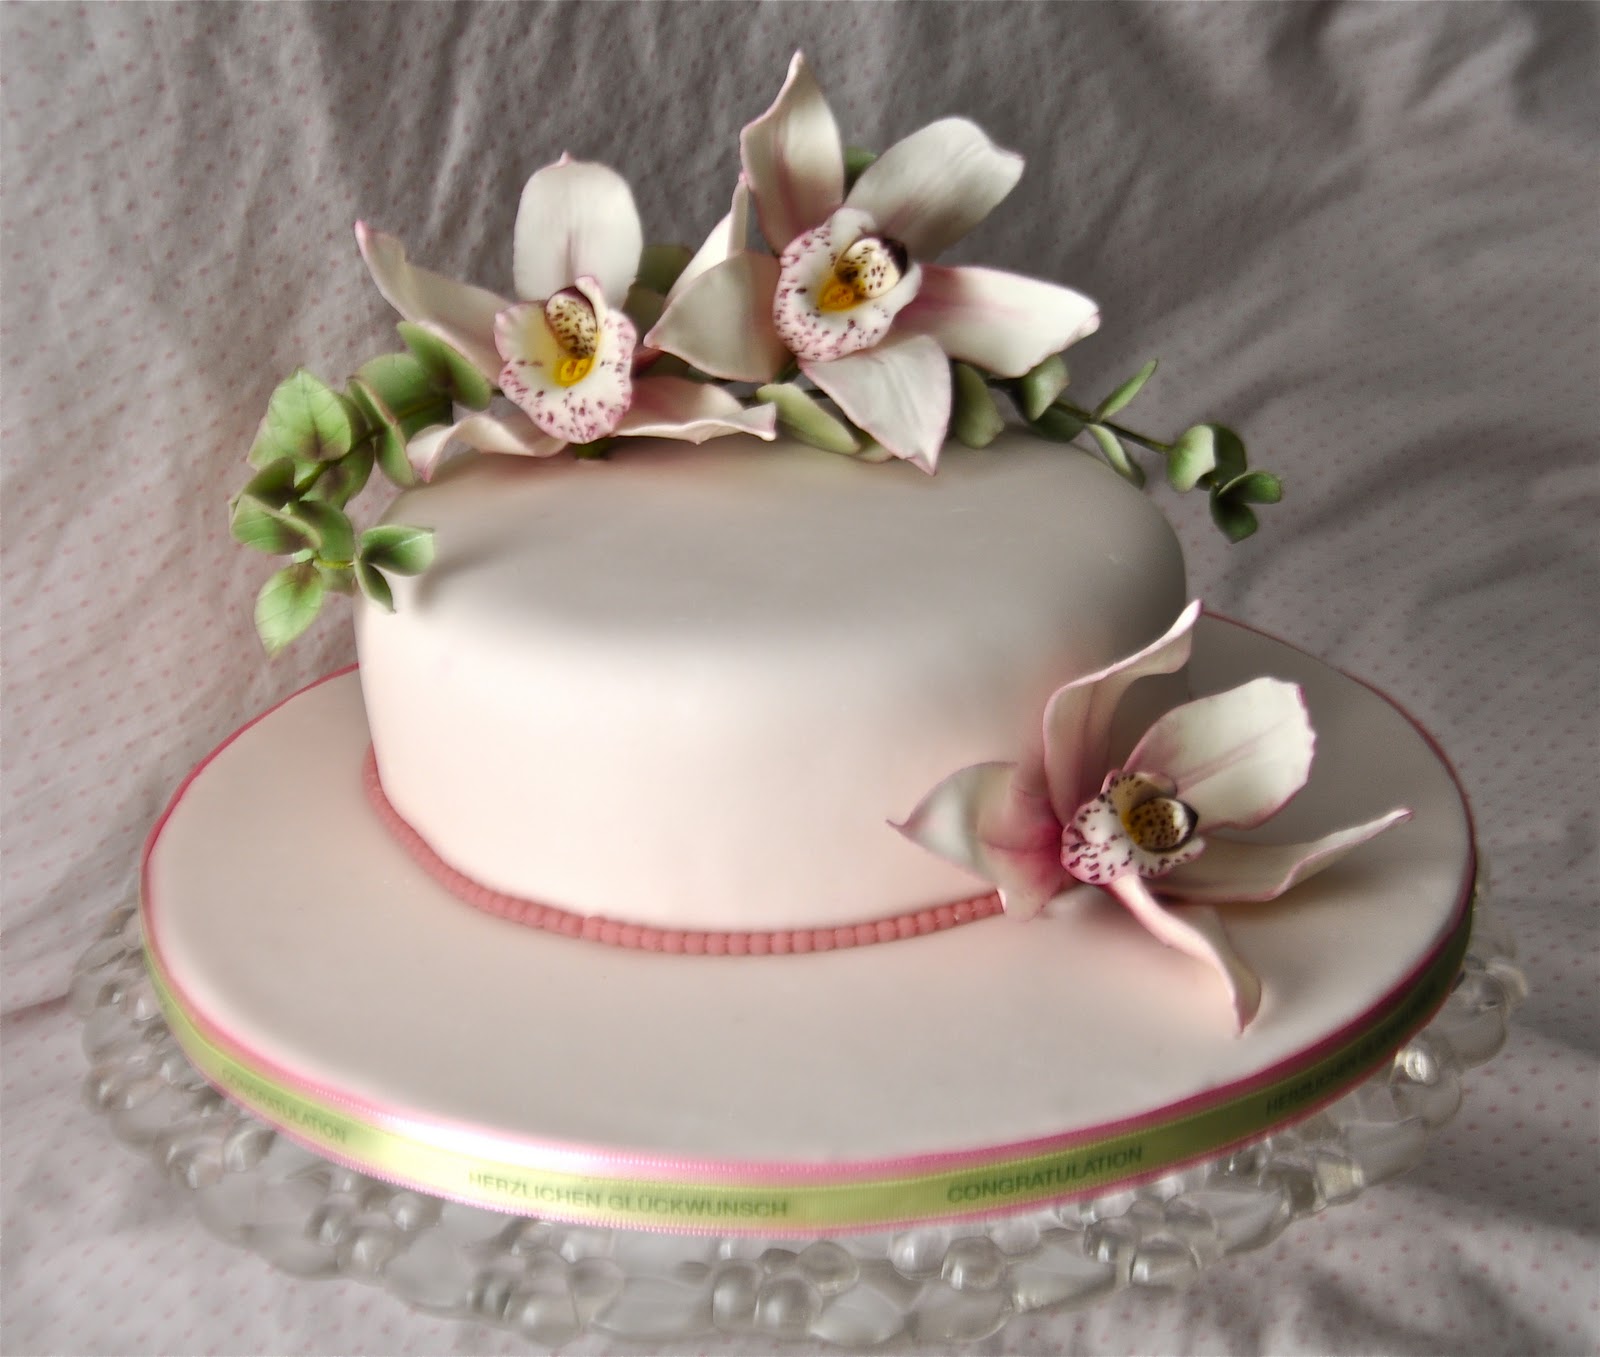 Cakes With Orchids